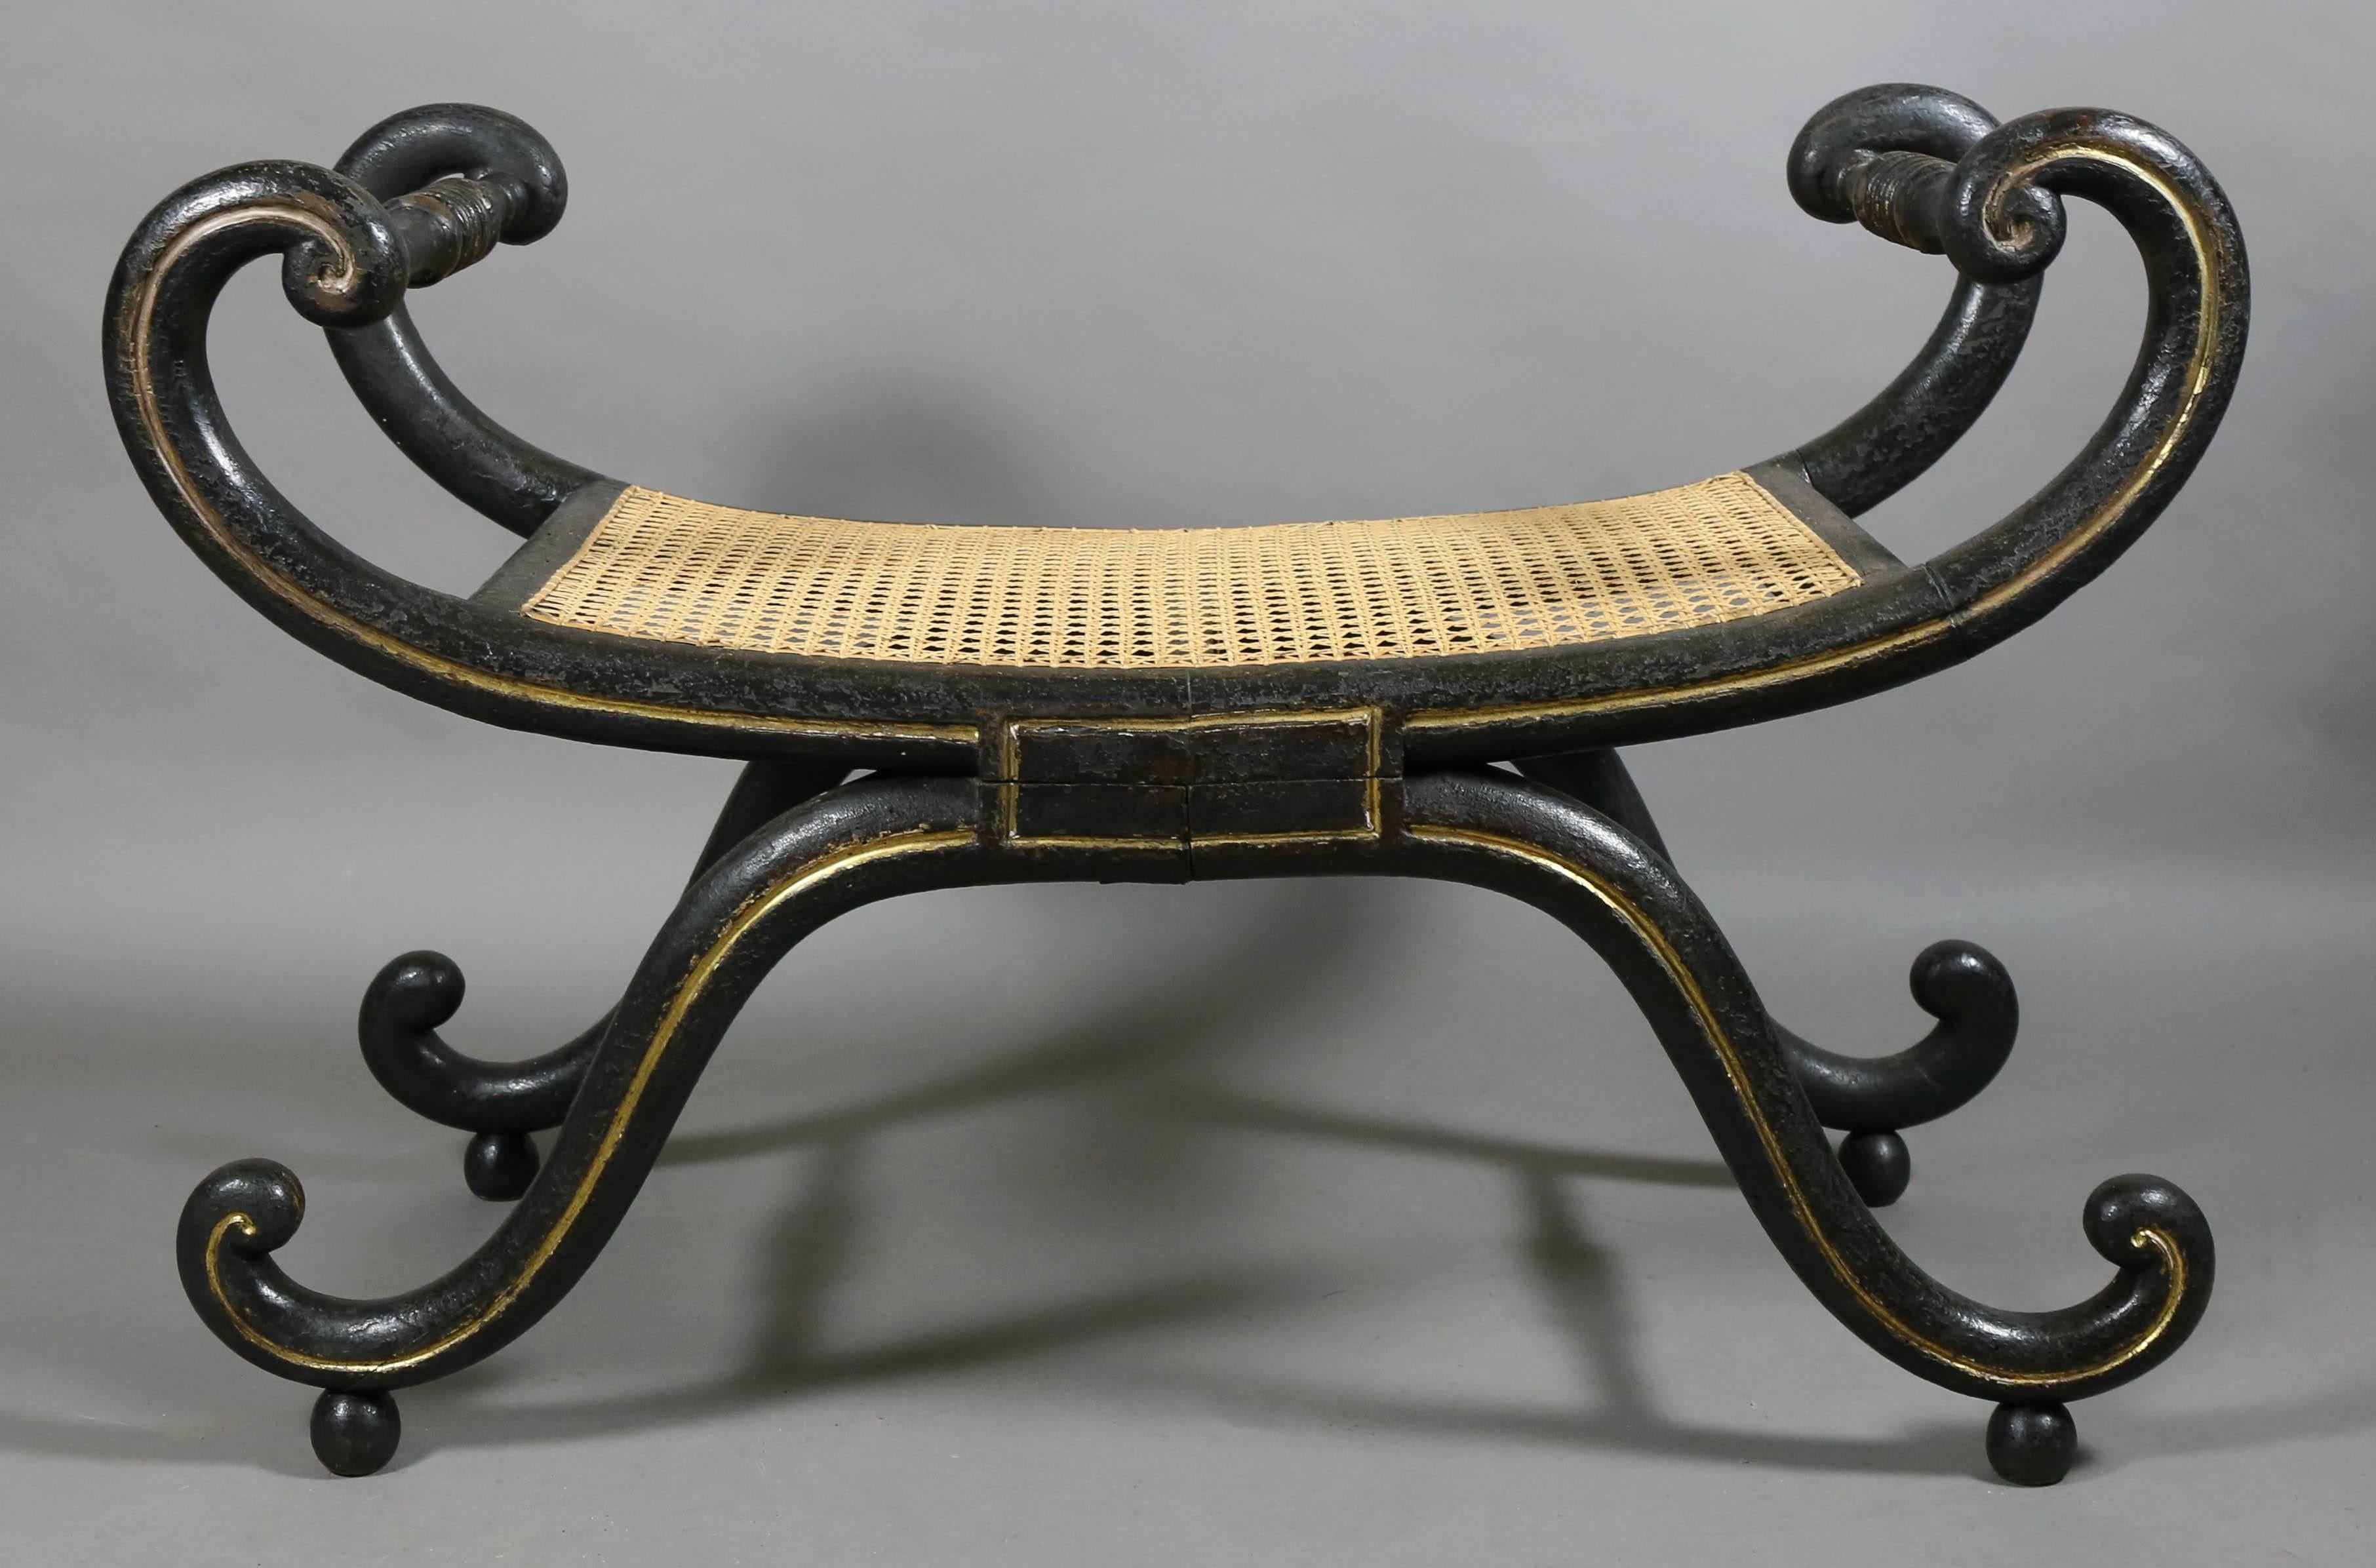 With a caned seat and gilded detailing.